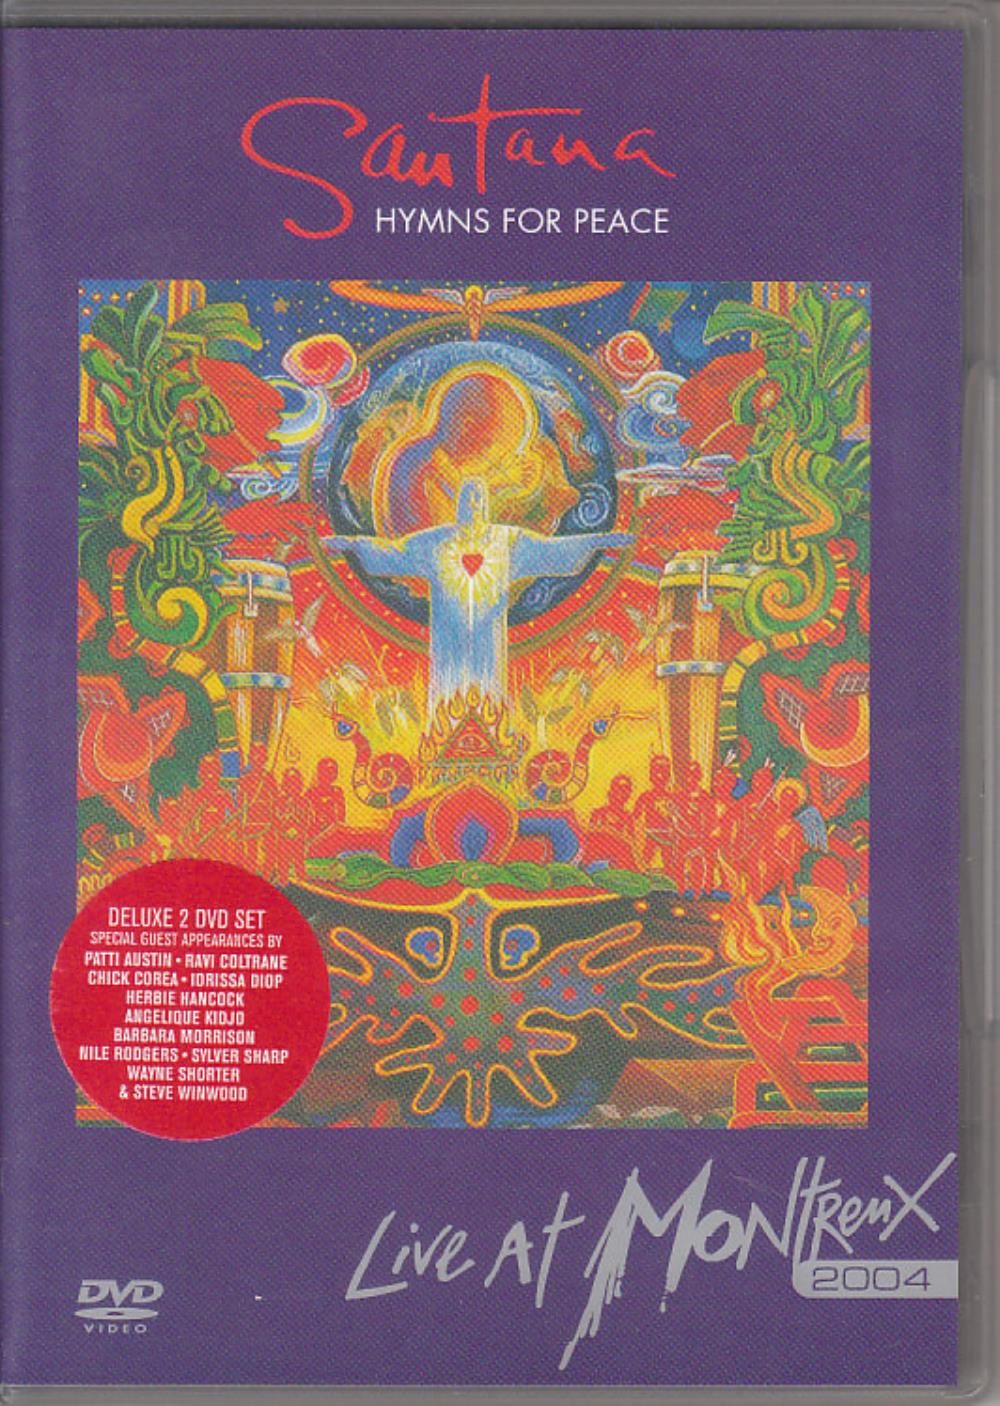 Santana - Hymns for Peace - Live at Montreux 2004 CD (album) cover